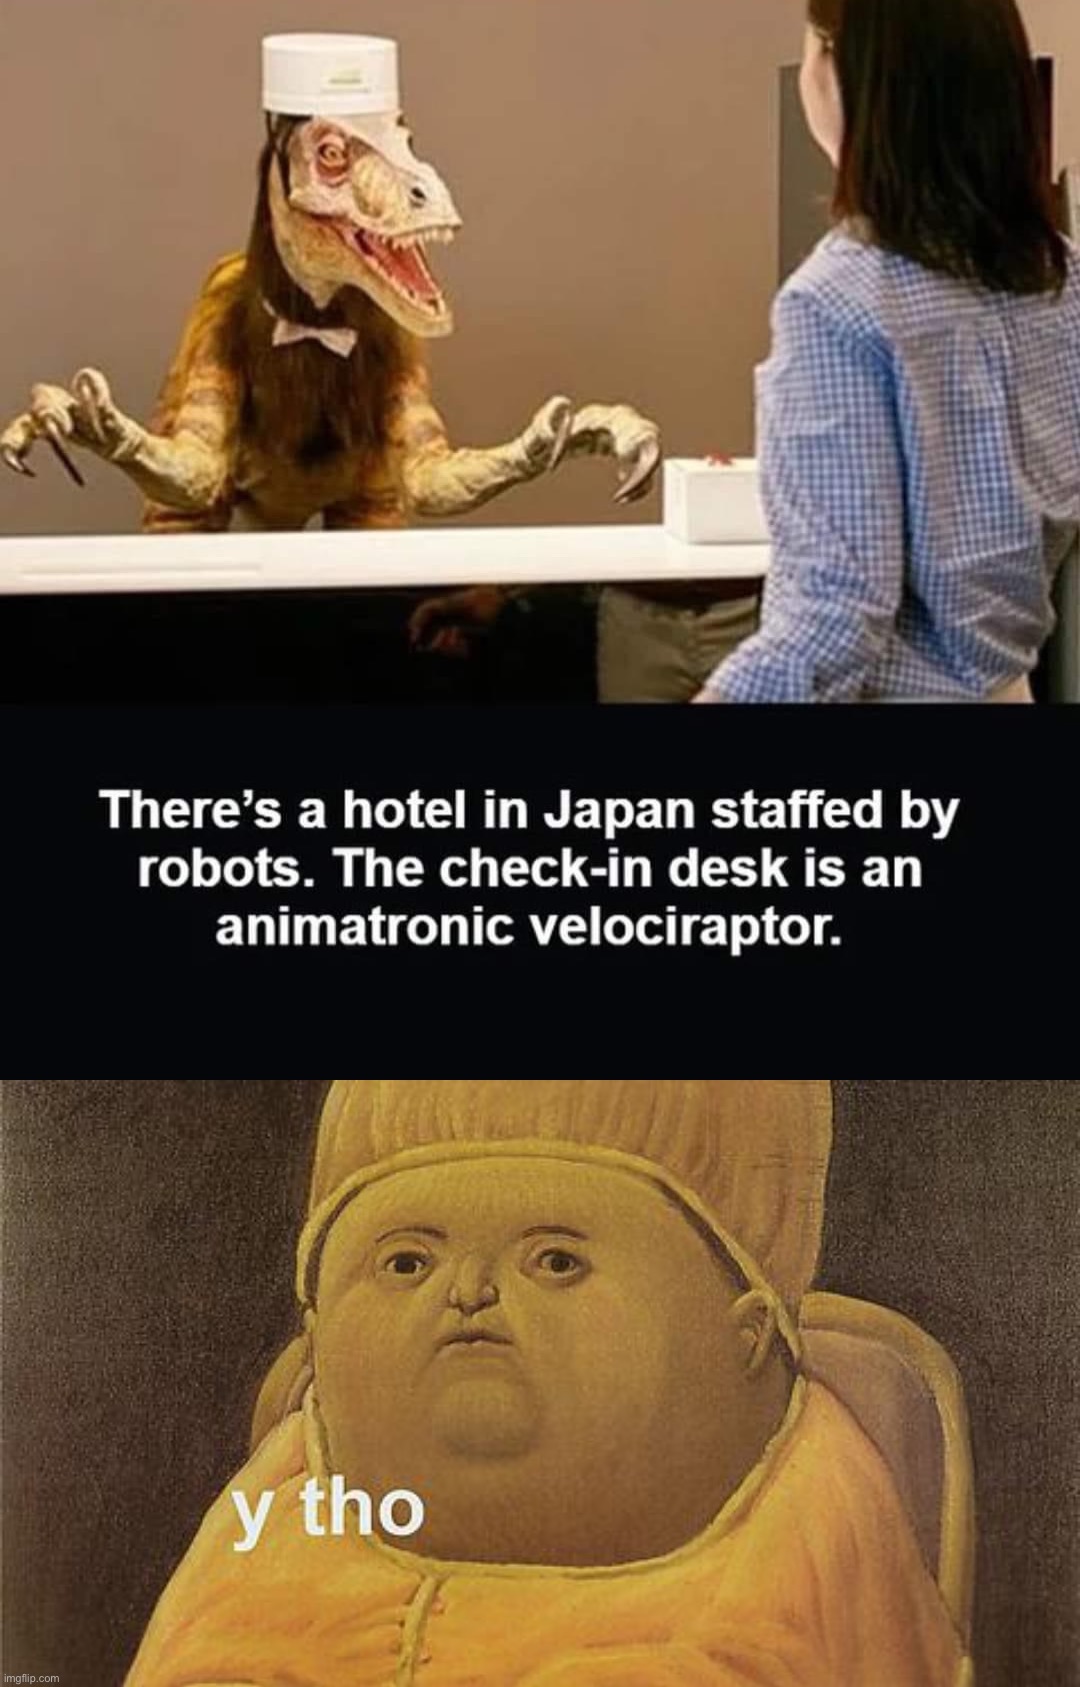 only in Japan | image tagged in hotel in japan,y tho,japan,meanwhile in japan,why japan,why tho | made w/ Imgflip meme maker